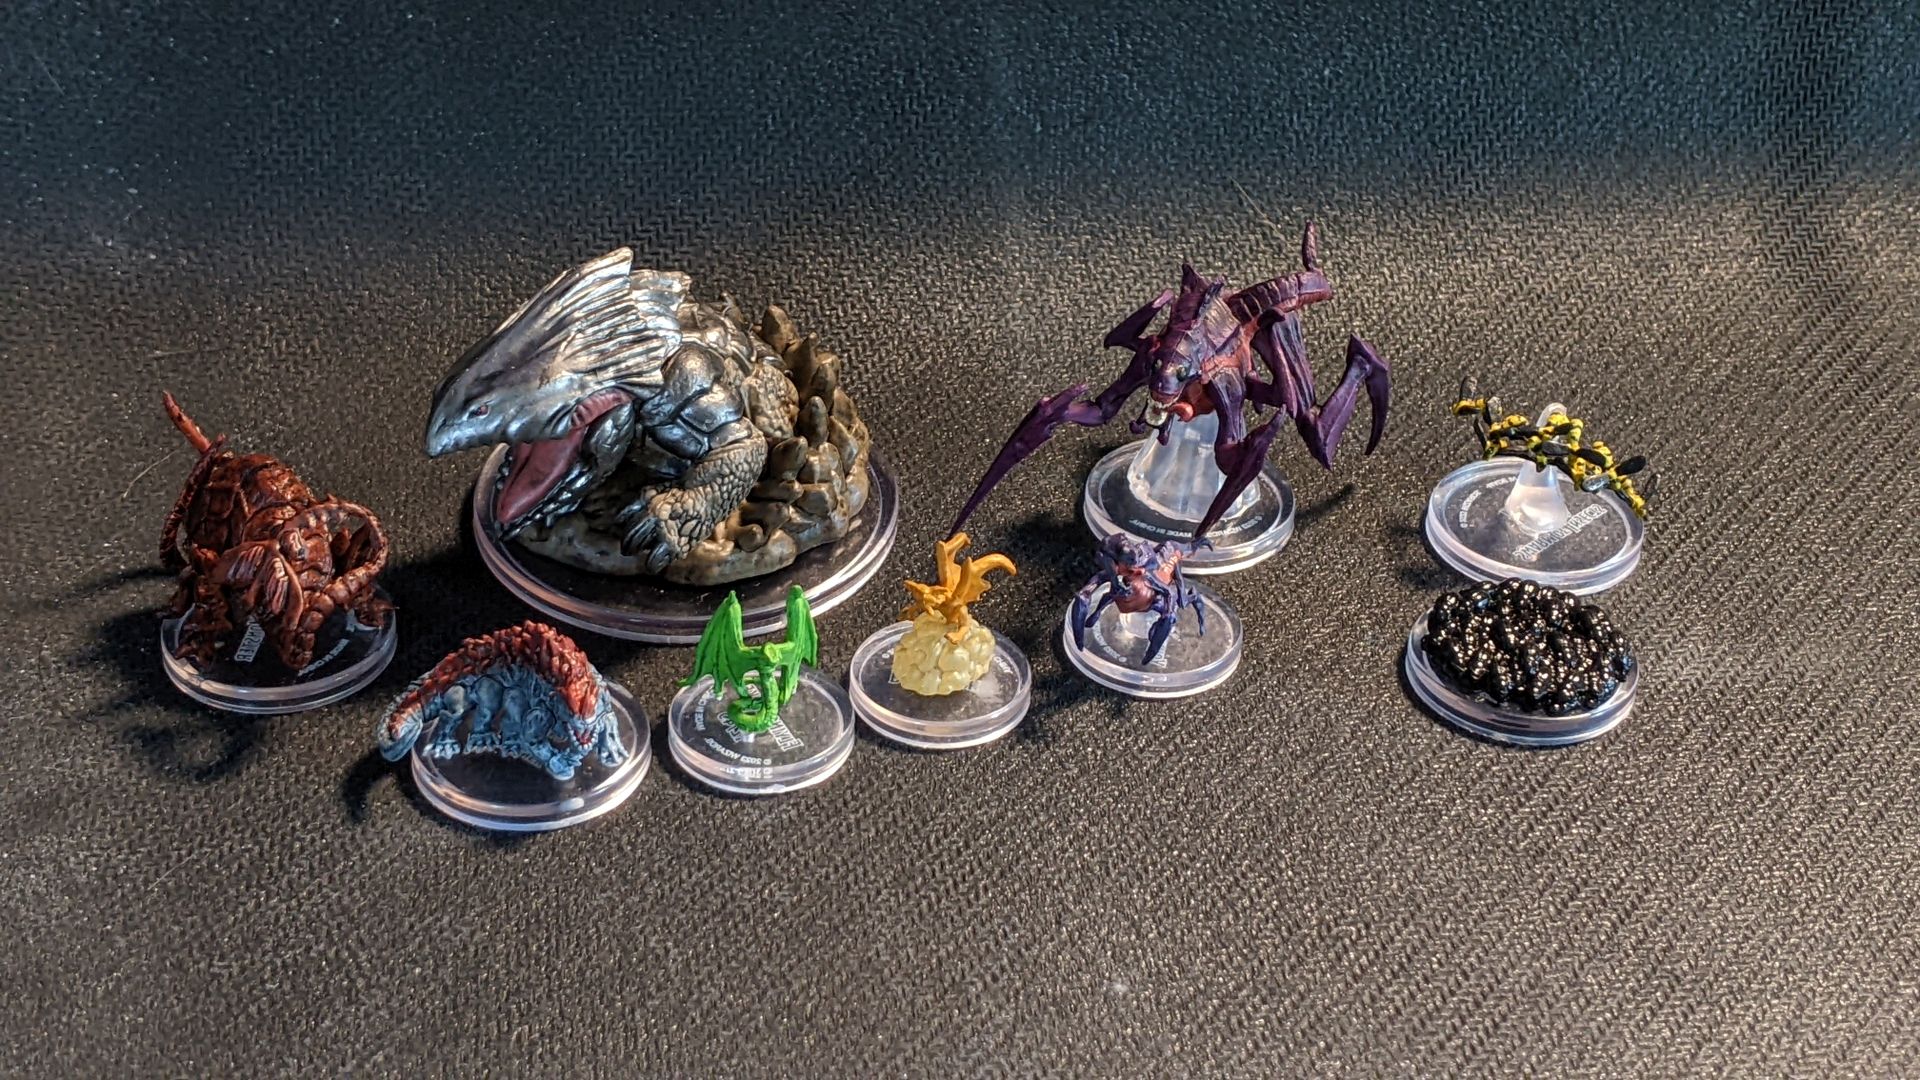 A group of monsters and were creatures from Wizkids Sand and Stone Blind Box